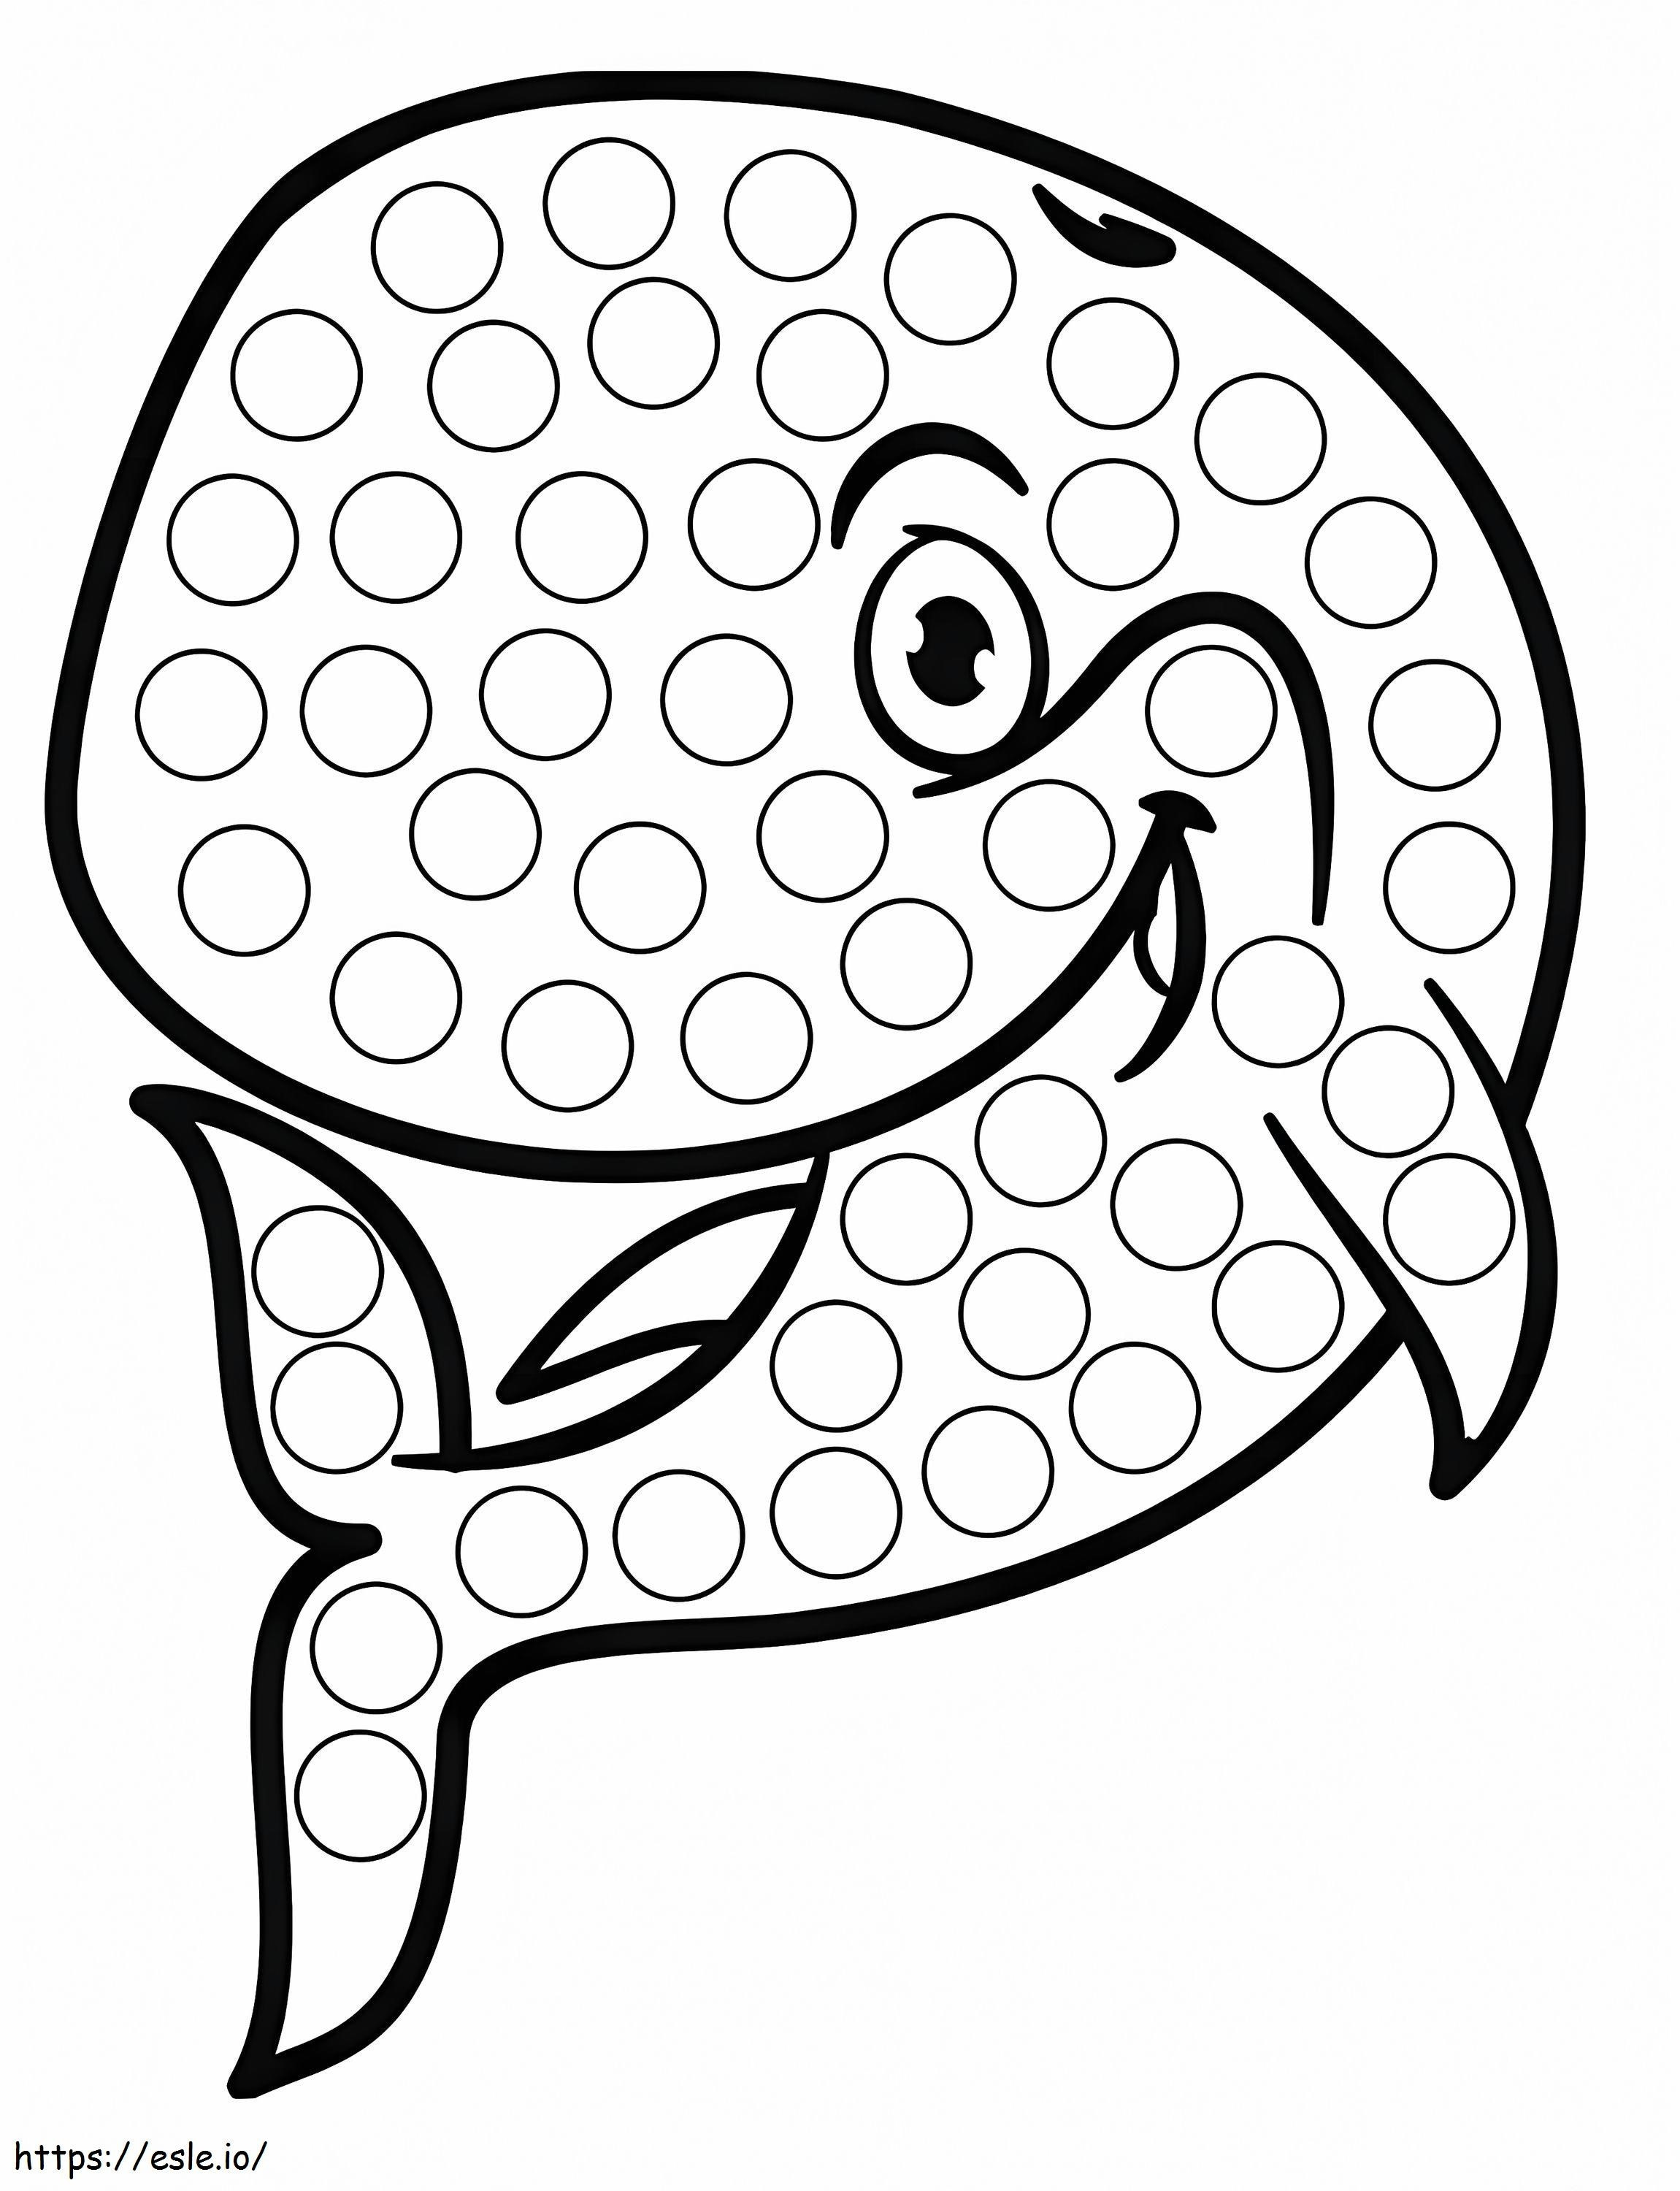 Whale Dot Marker coloring page